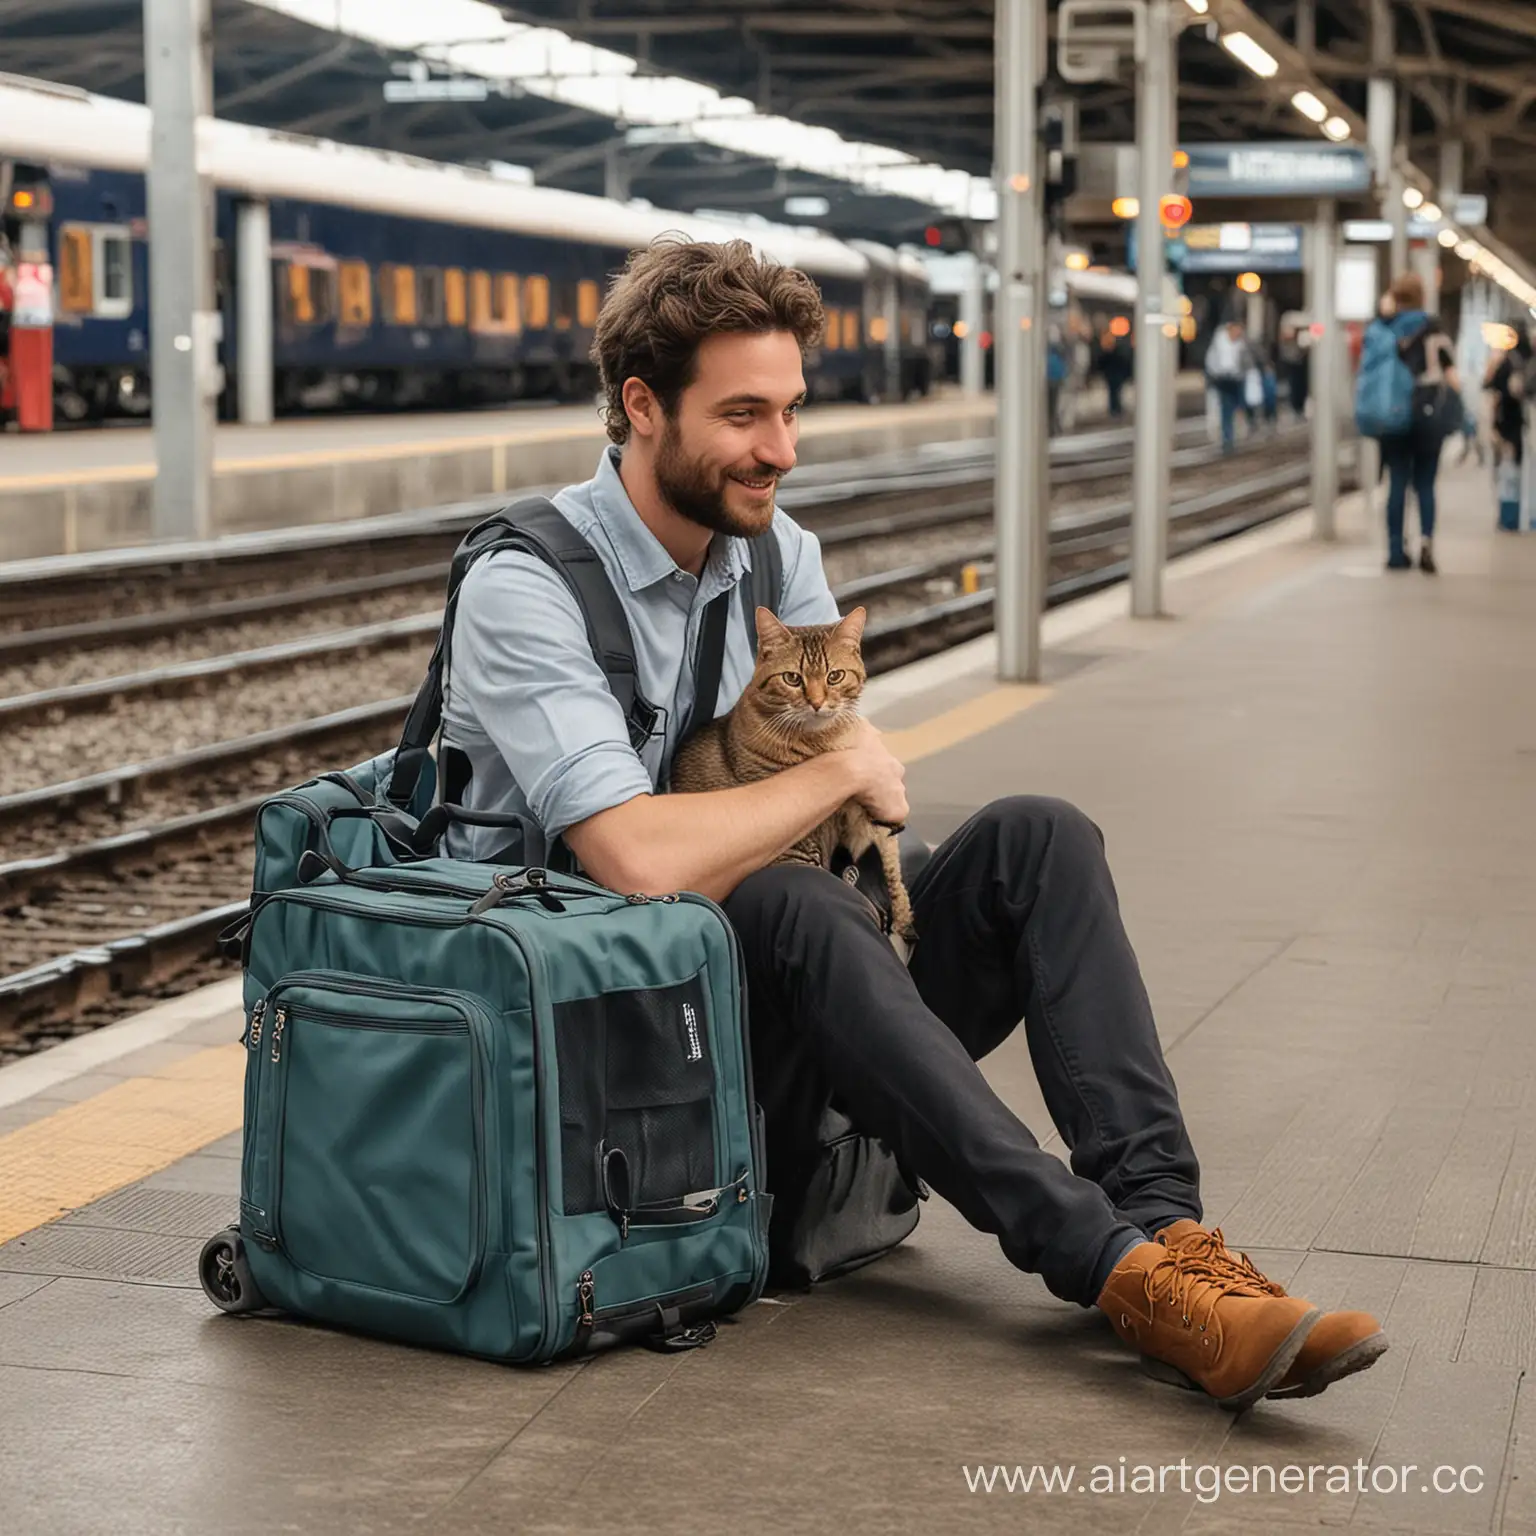 Man-and-Cat-Waiting-in-Carrier-at-Train-Station